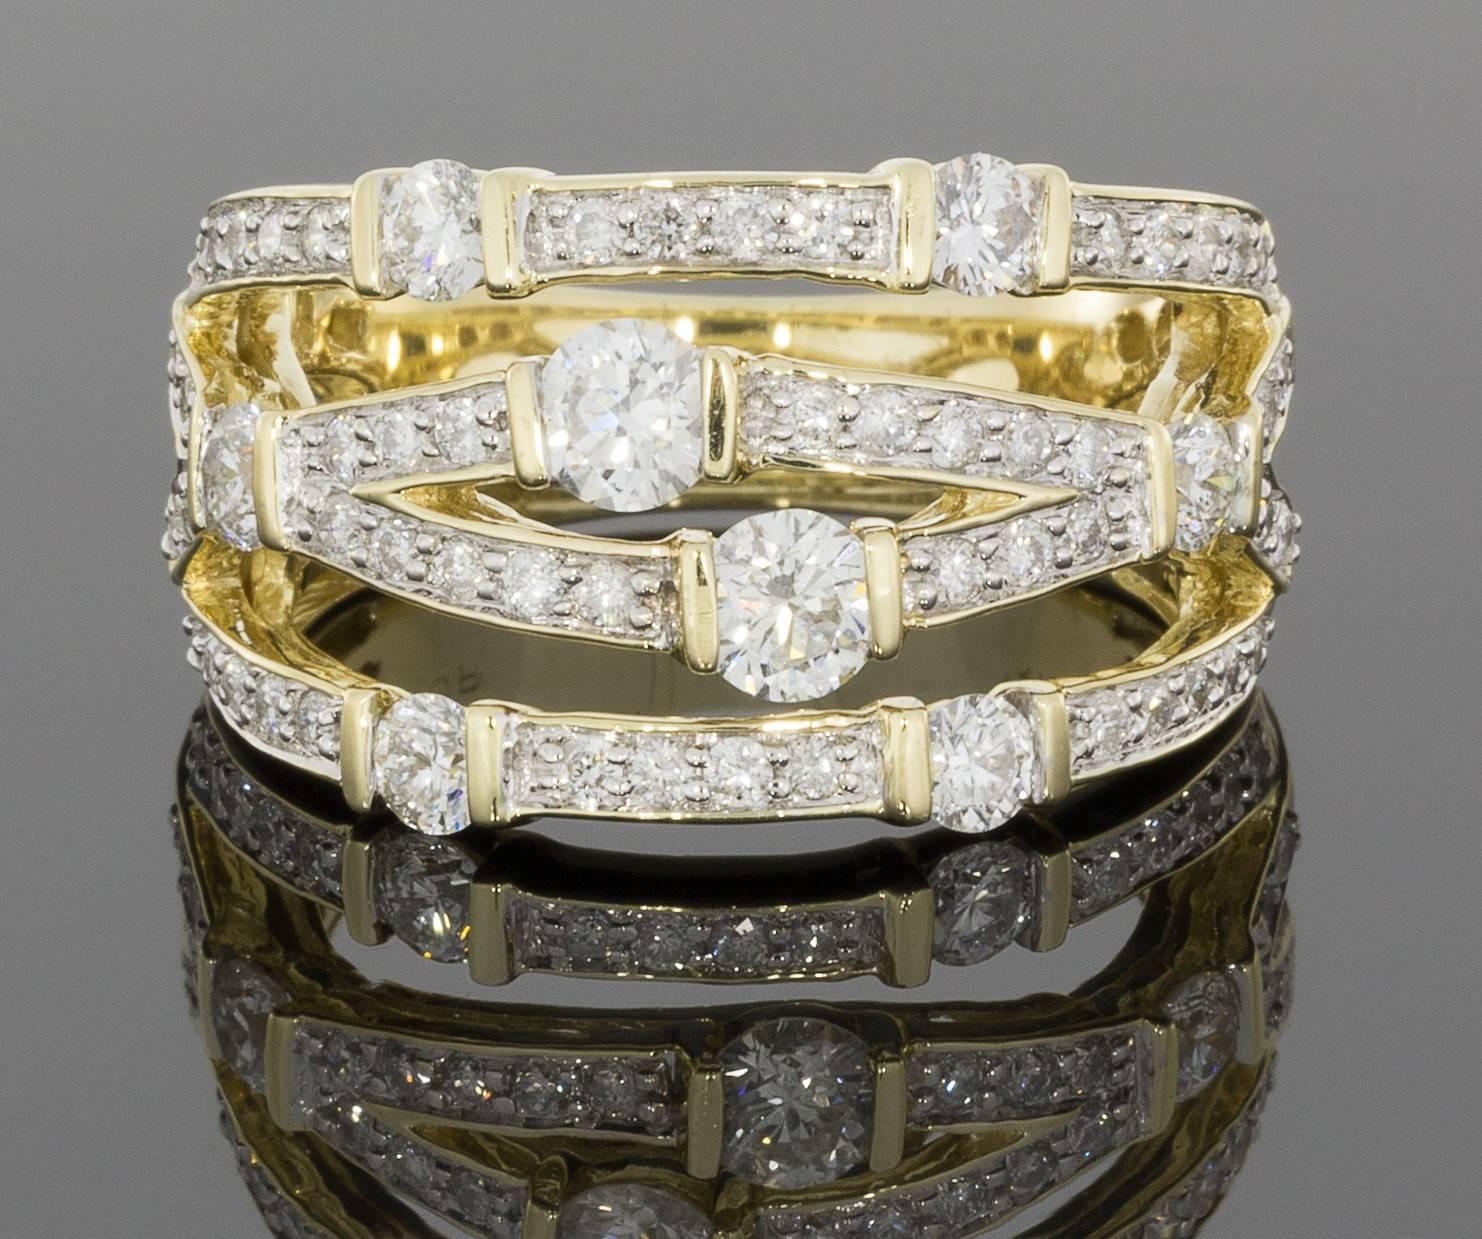 This unique band is a beautiful, wide 14 karat yellow gold diamond band that makes quite the sparkly statement! It can be used as a right hand ring or a non-traditional wedding ring. The ring features round brilliant cut diamonds that are bar &